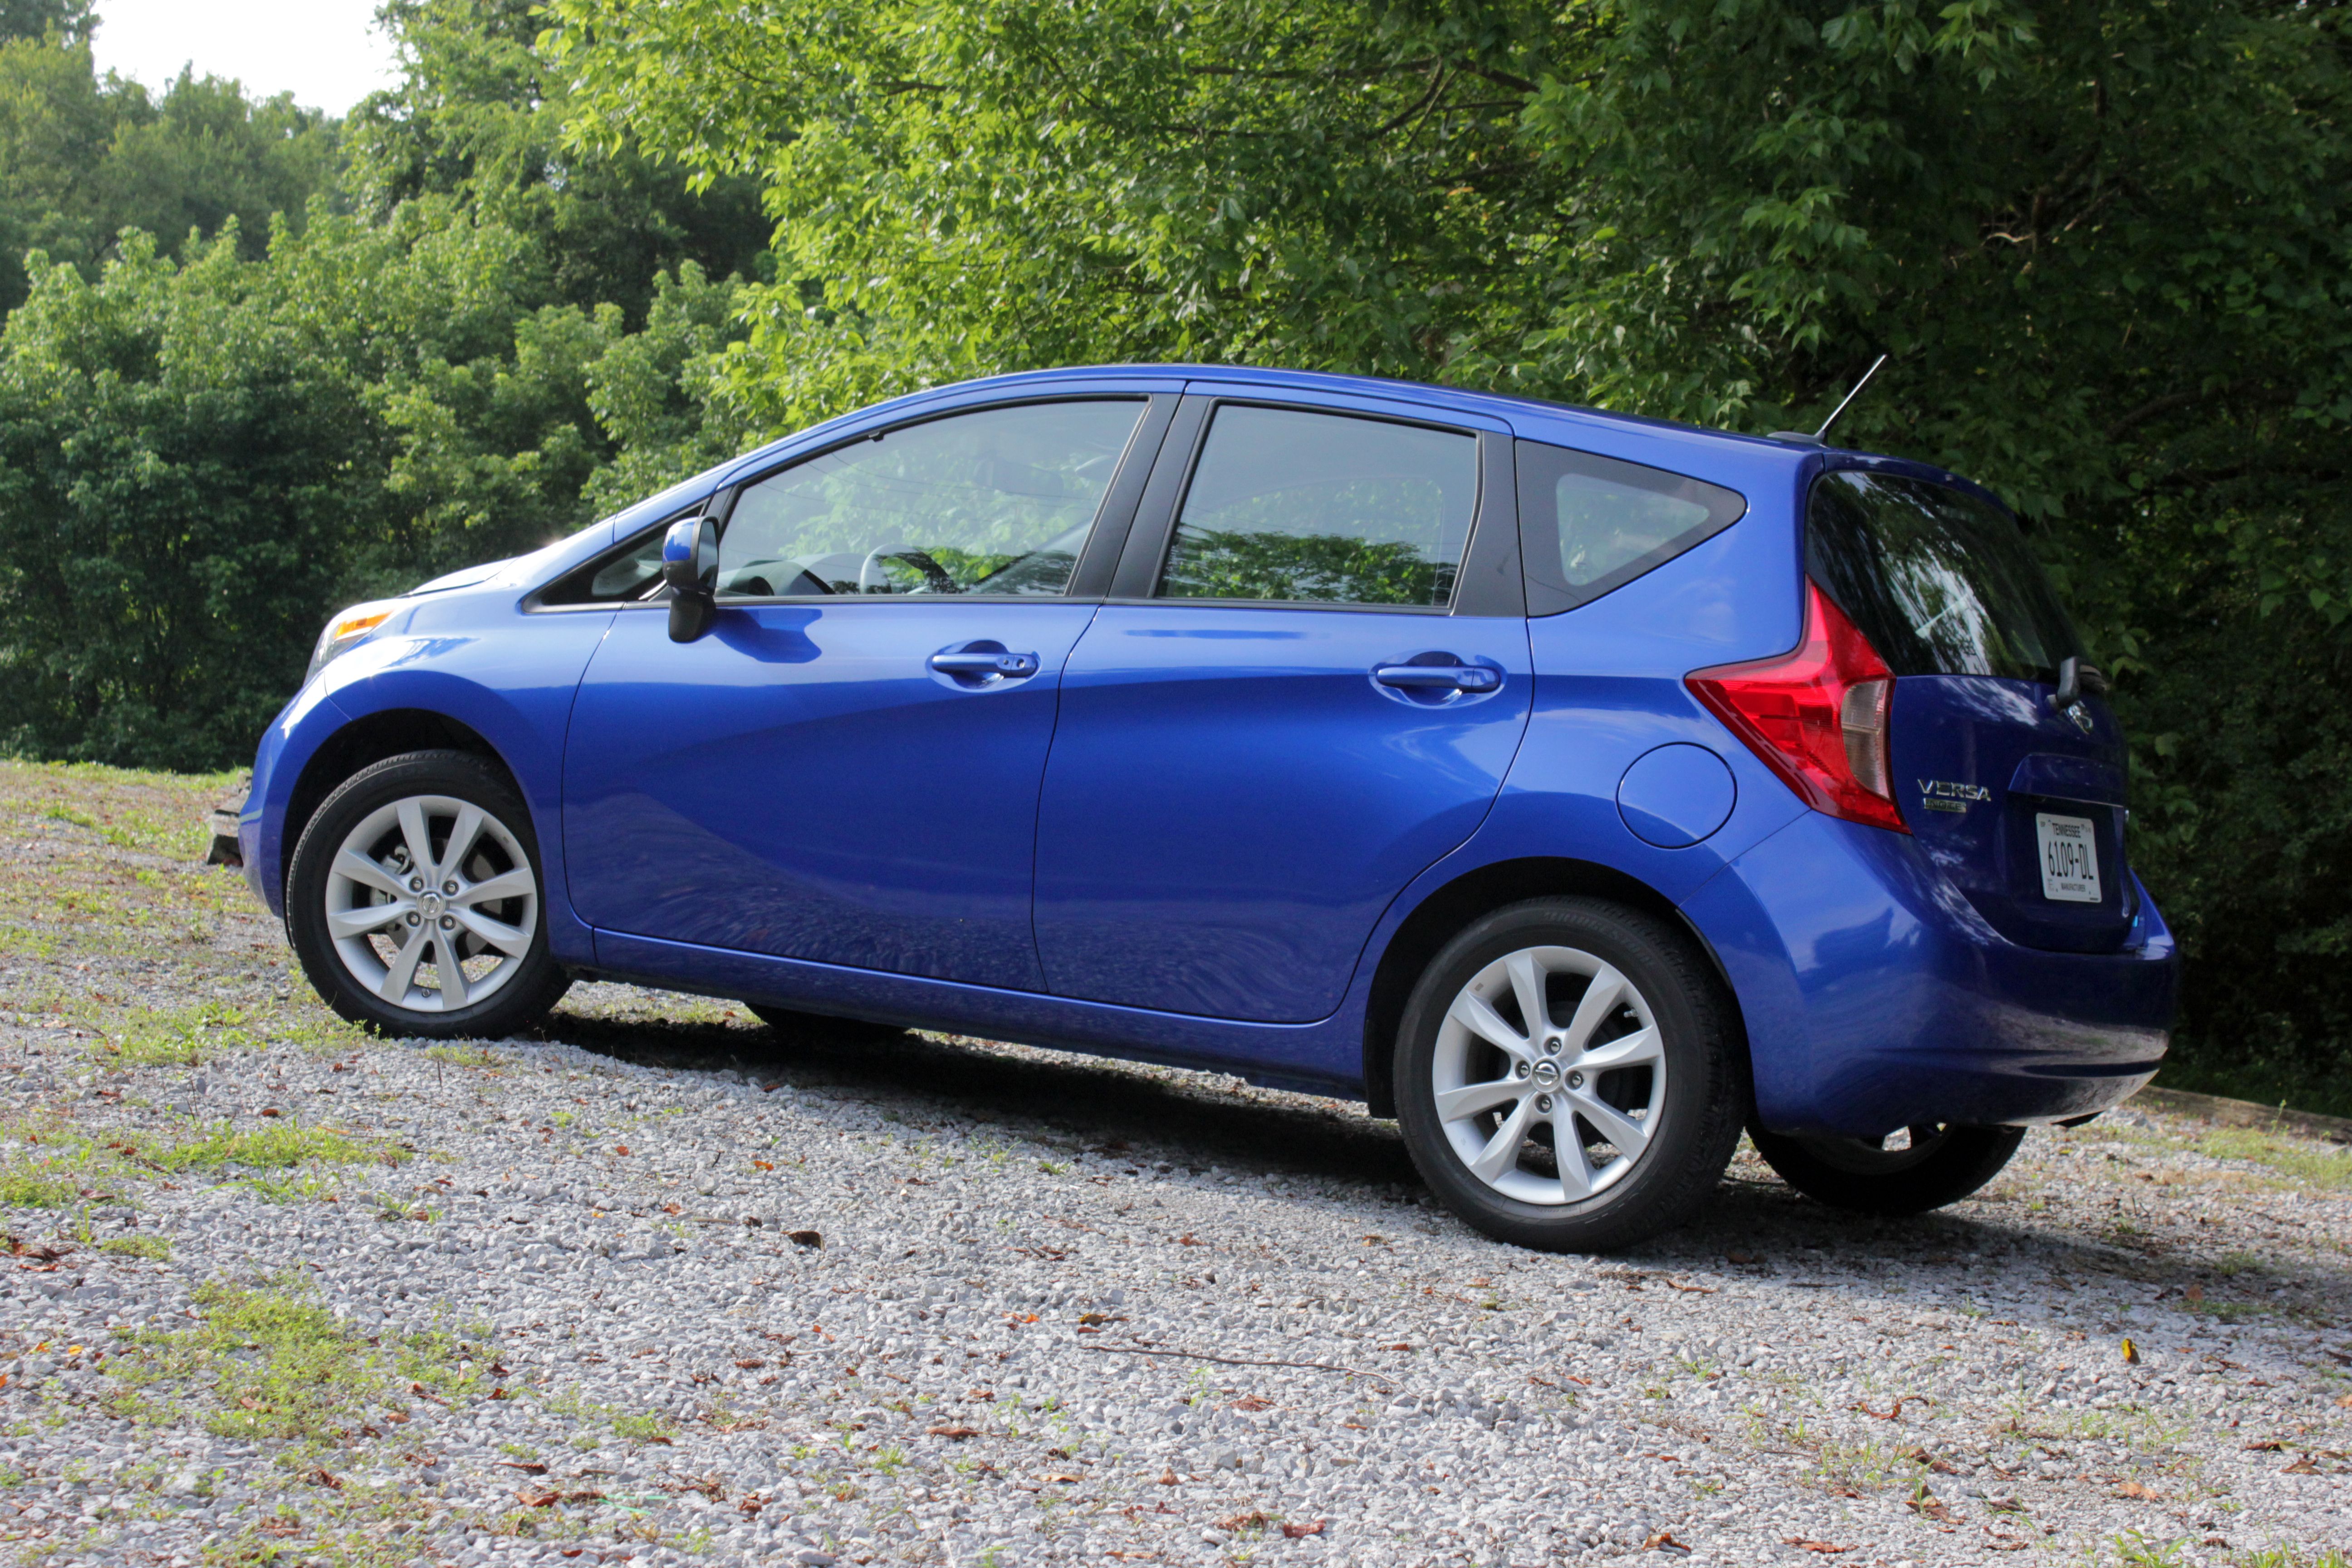 2014 Nissan Versa Note Review - Driven